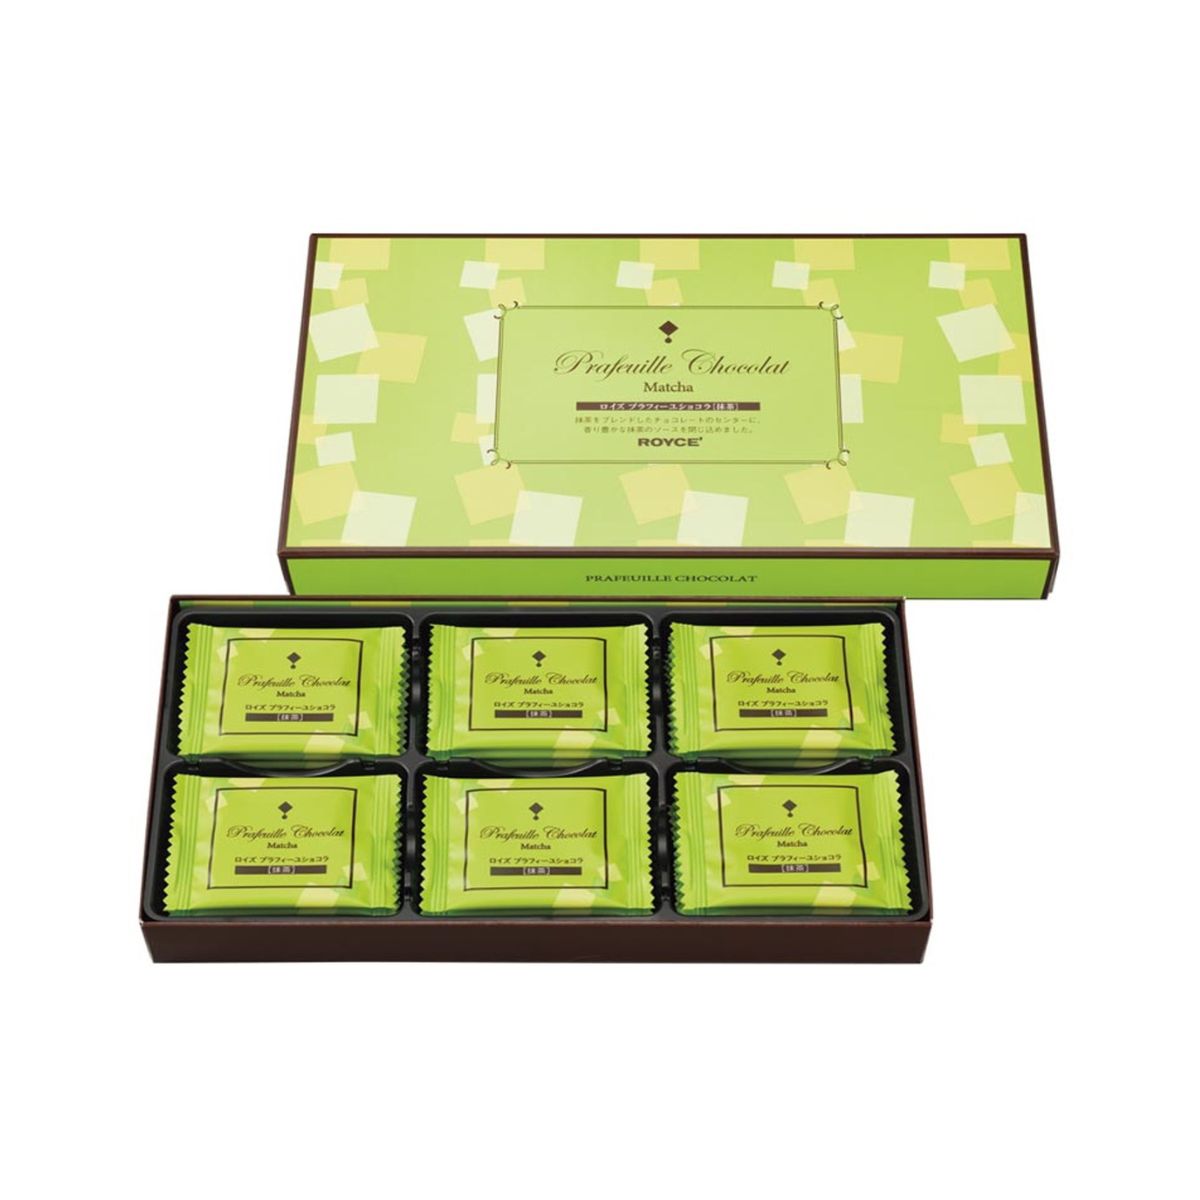 ROYCE' Chocolate - Prafeuille Chocolat "Matcha" - Image shows on top center right a green box with cube prints. Text says Prafeuille Chocolat Matcha ROYCE'. Below on center left is a box with individually-wrapped chocolates with green wrapper and cube prints. Text says Prafeuille Chocolat Matcha.